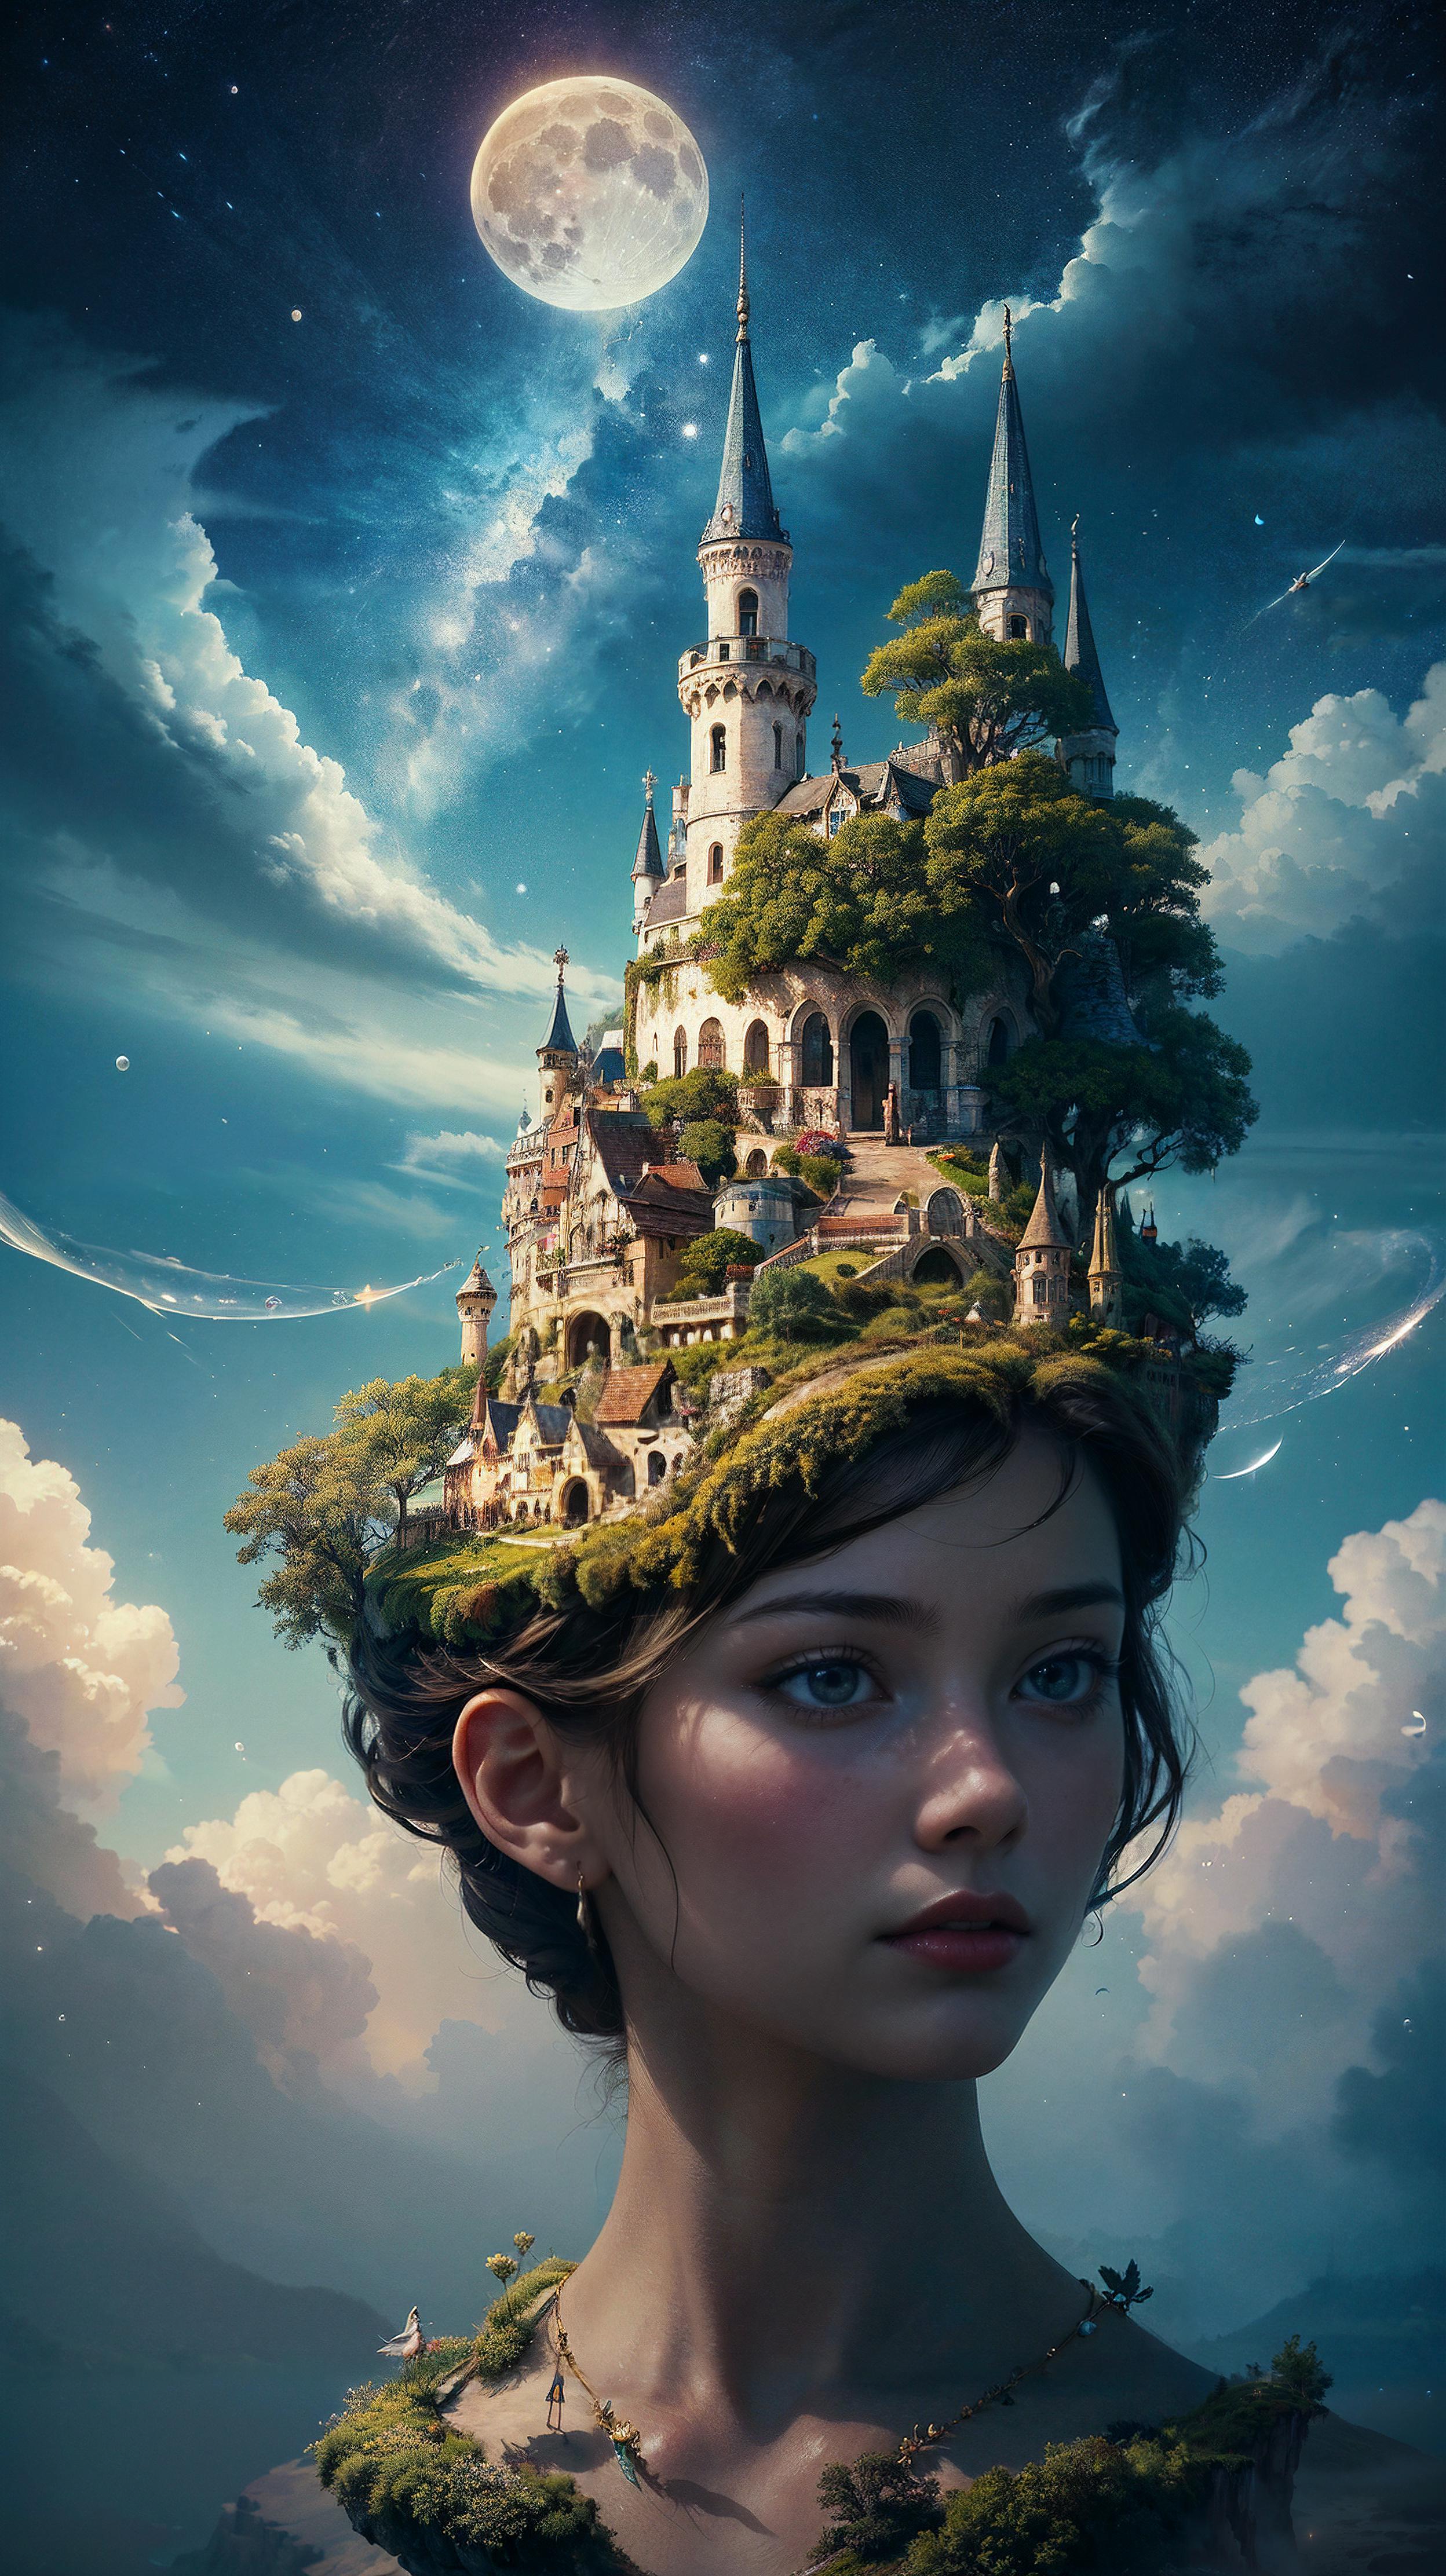 A young girl with a castle on her head.